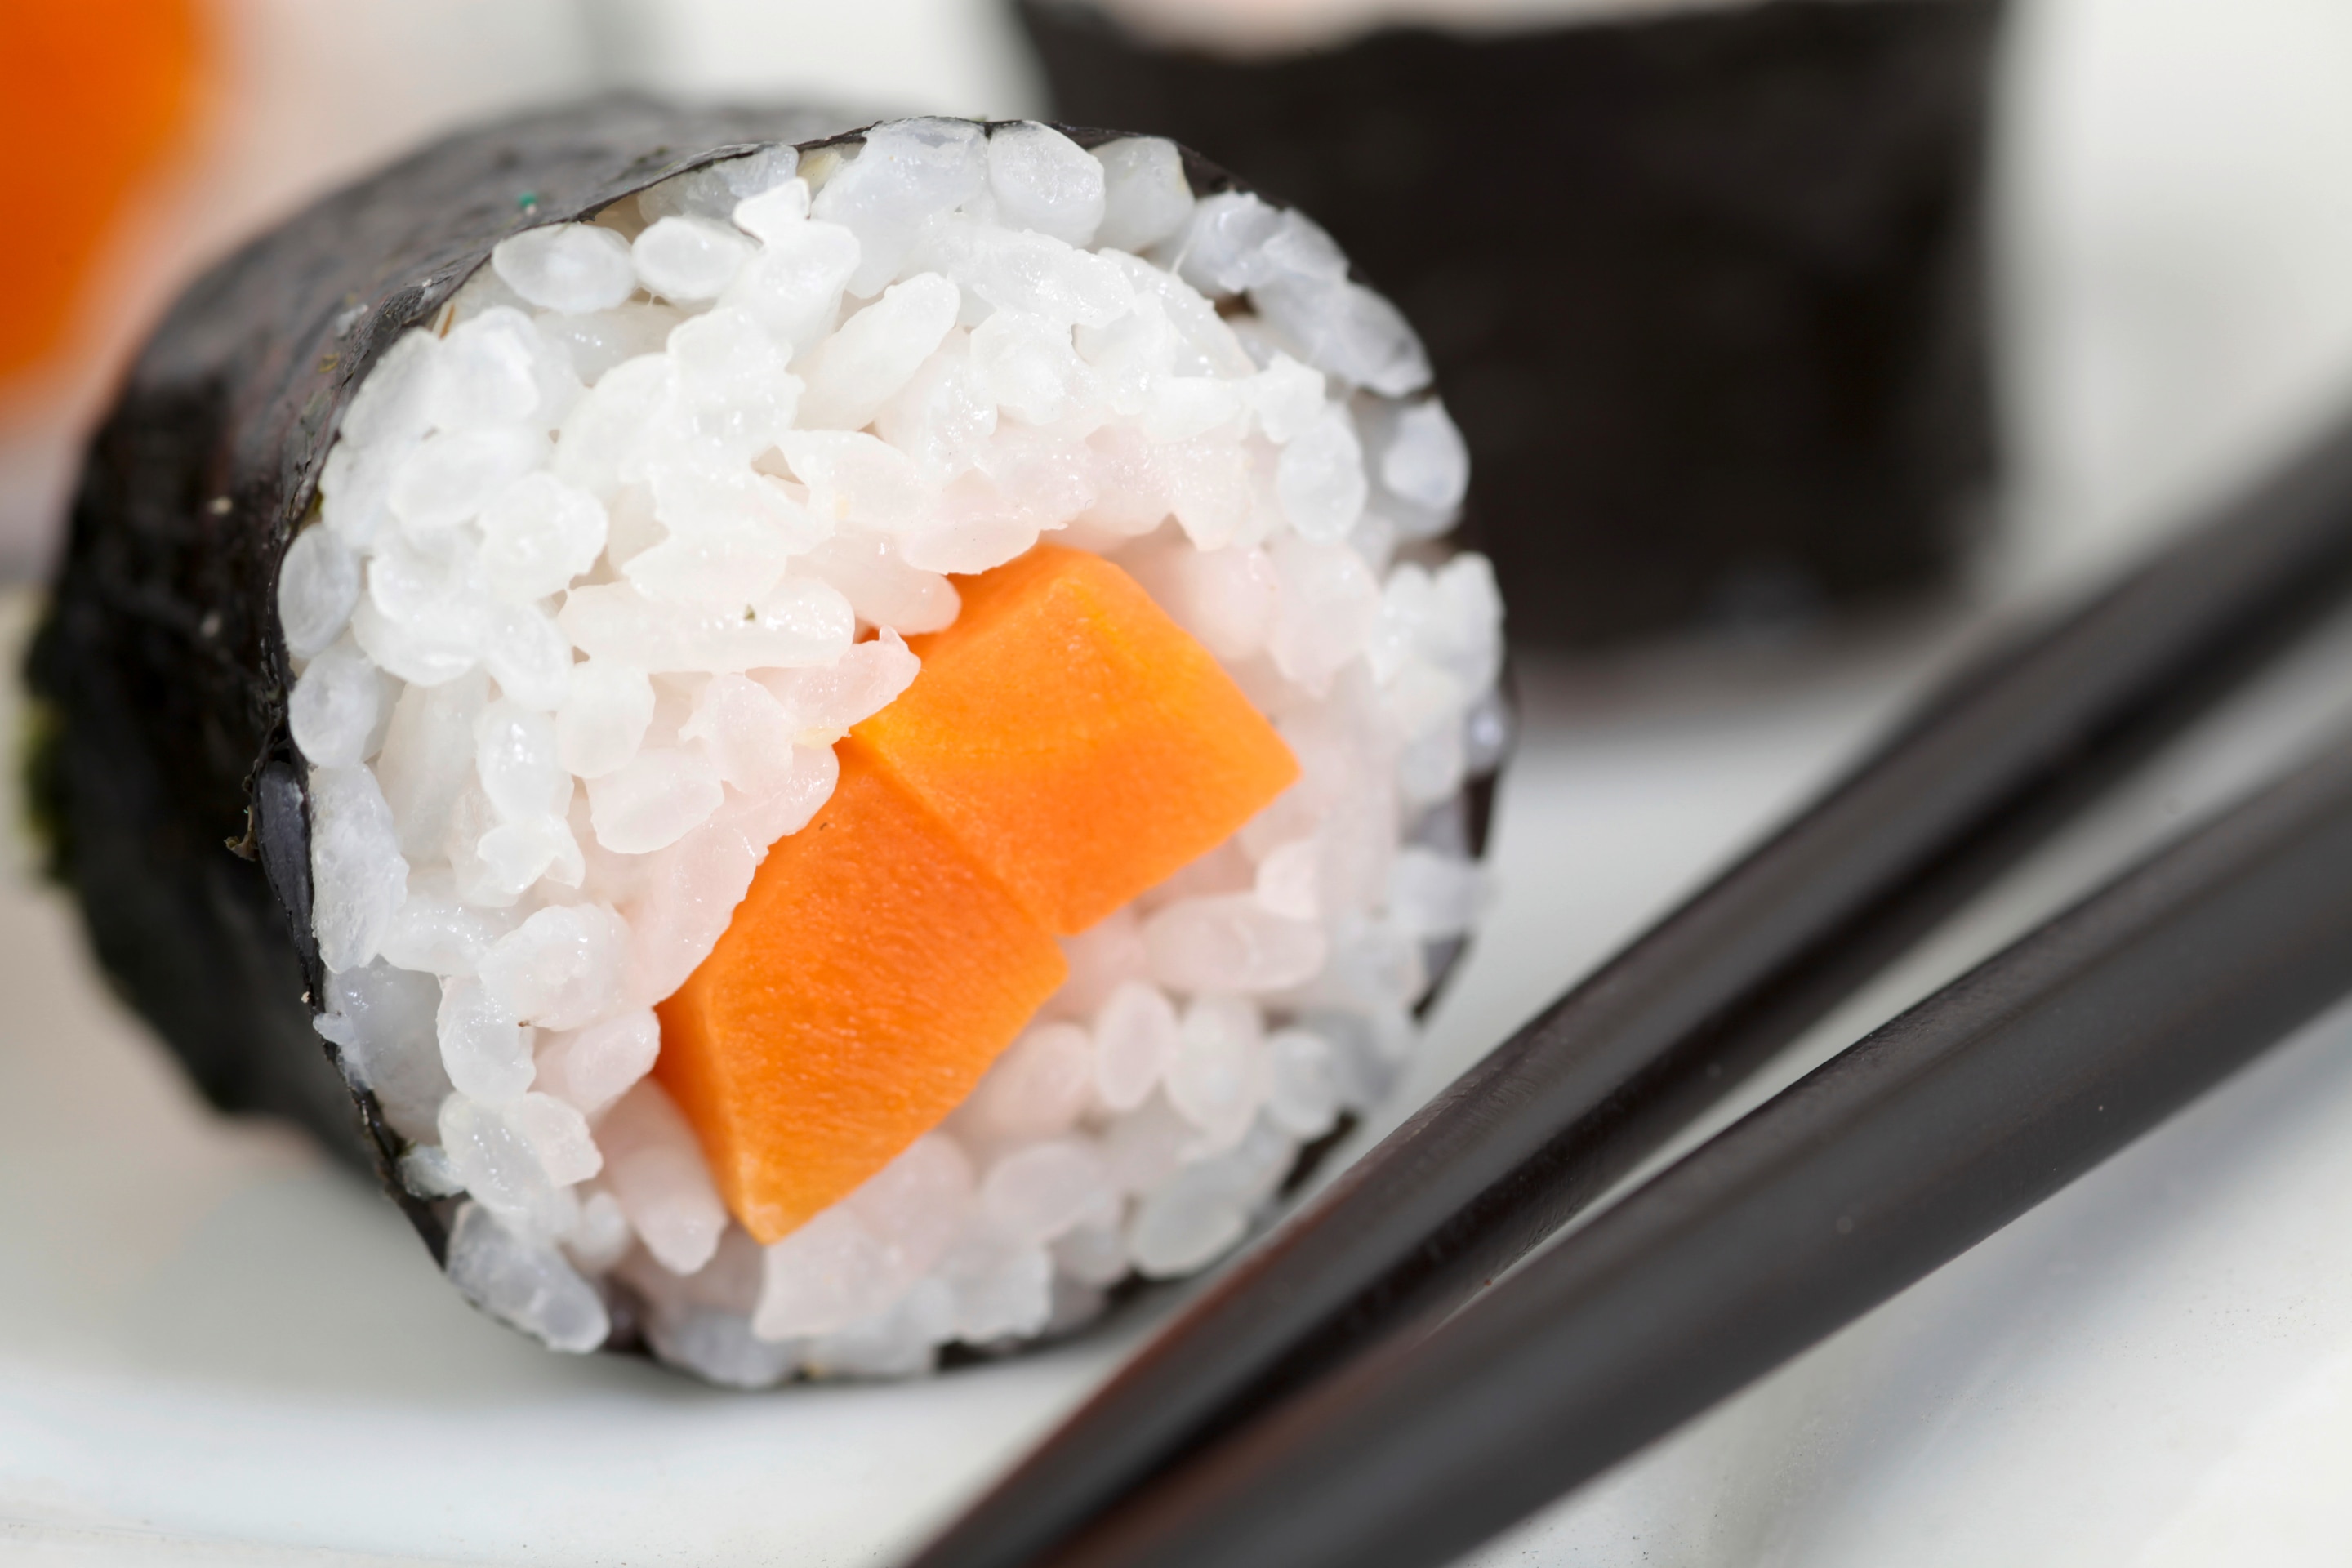 A close-up photo of a sushi roll filled with a carrot